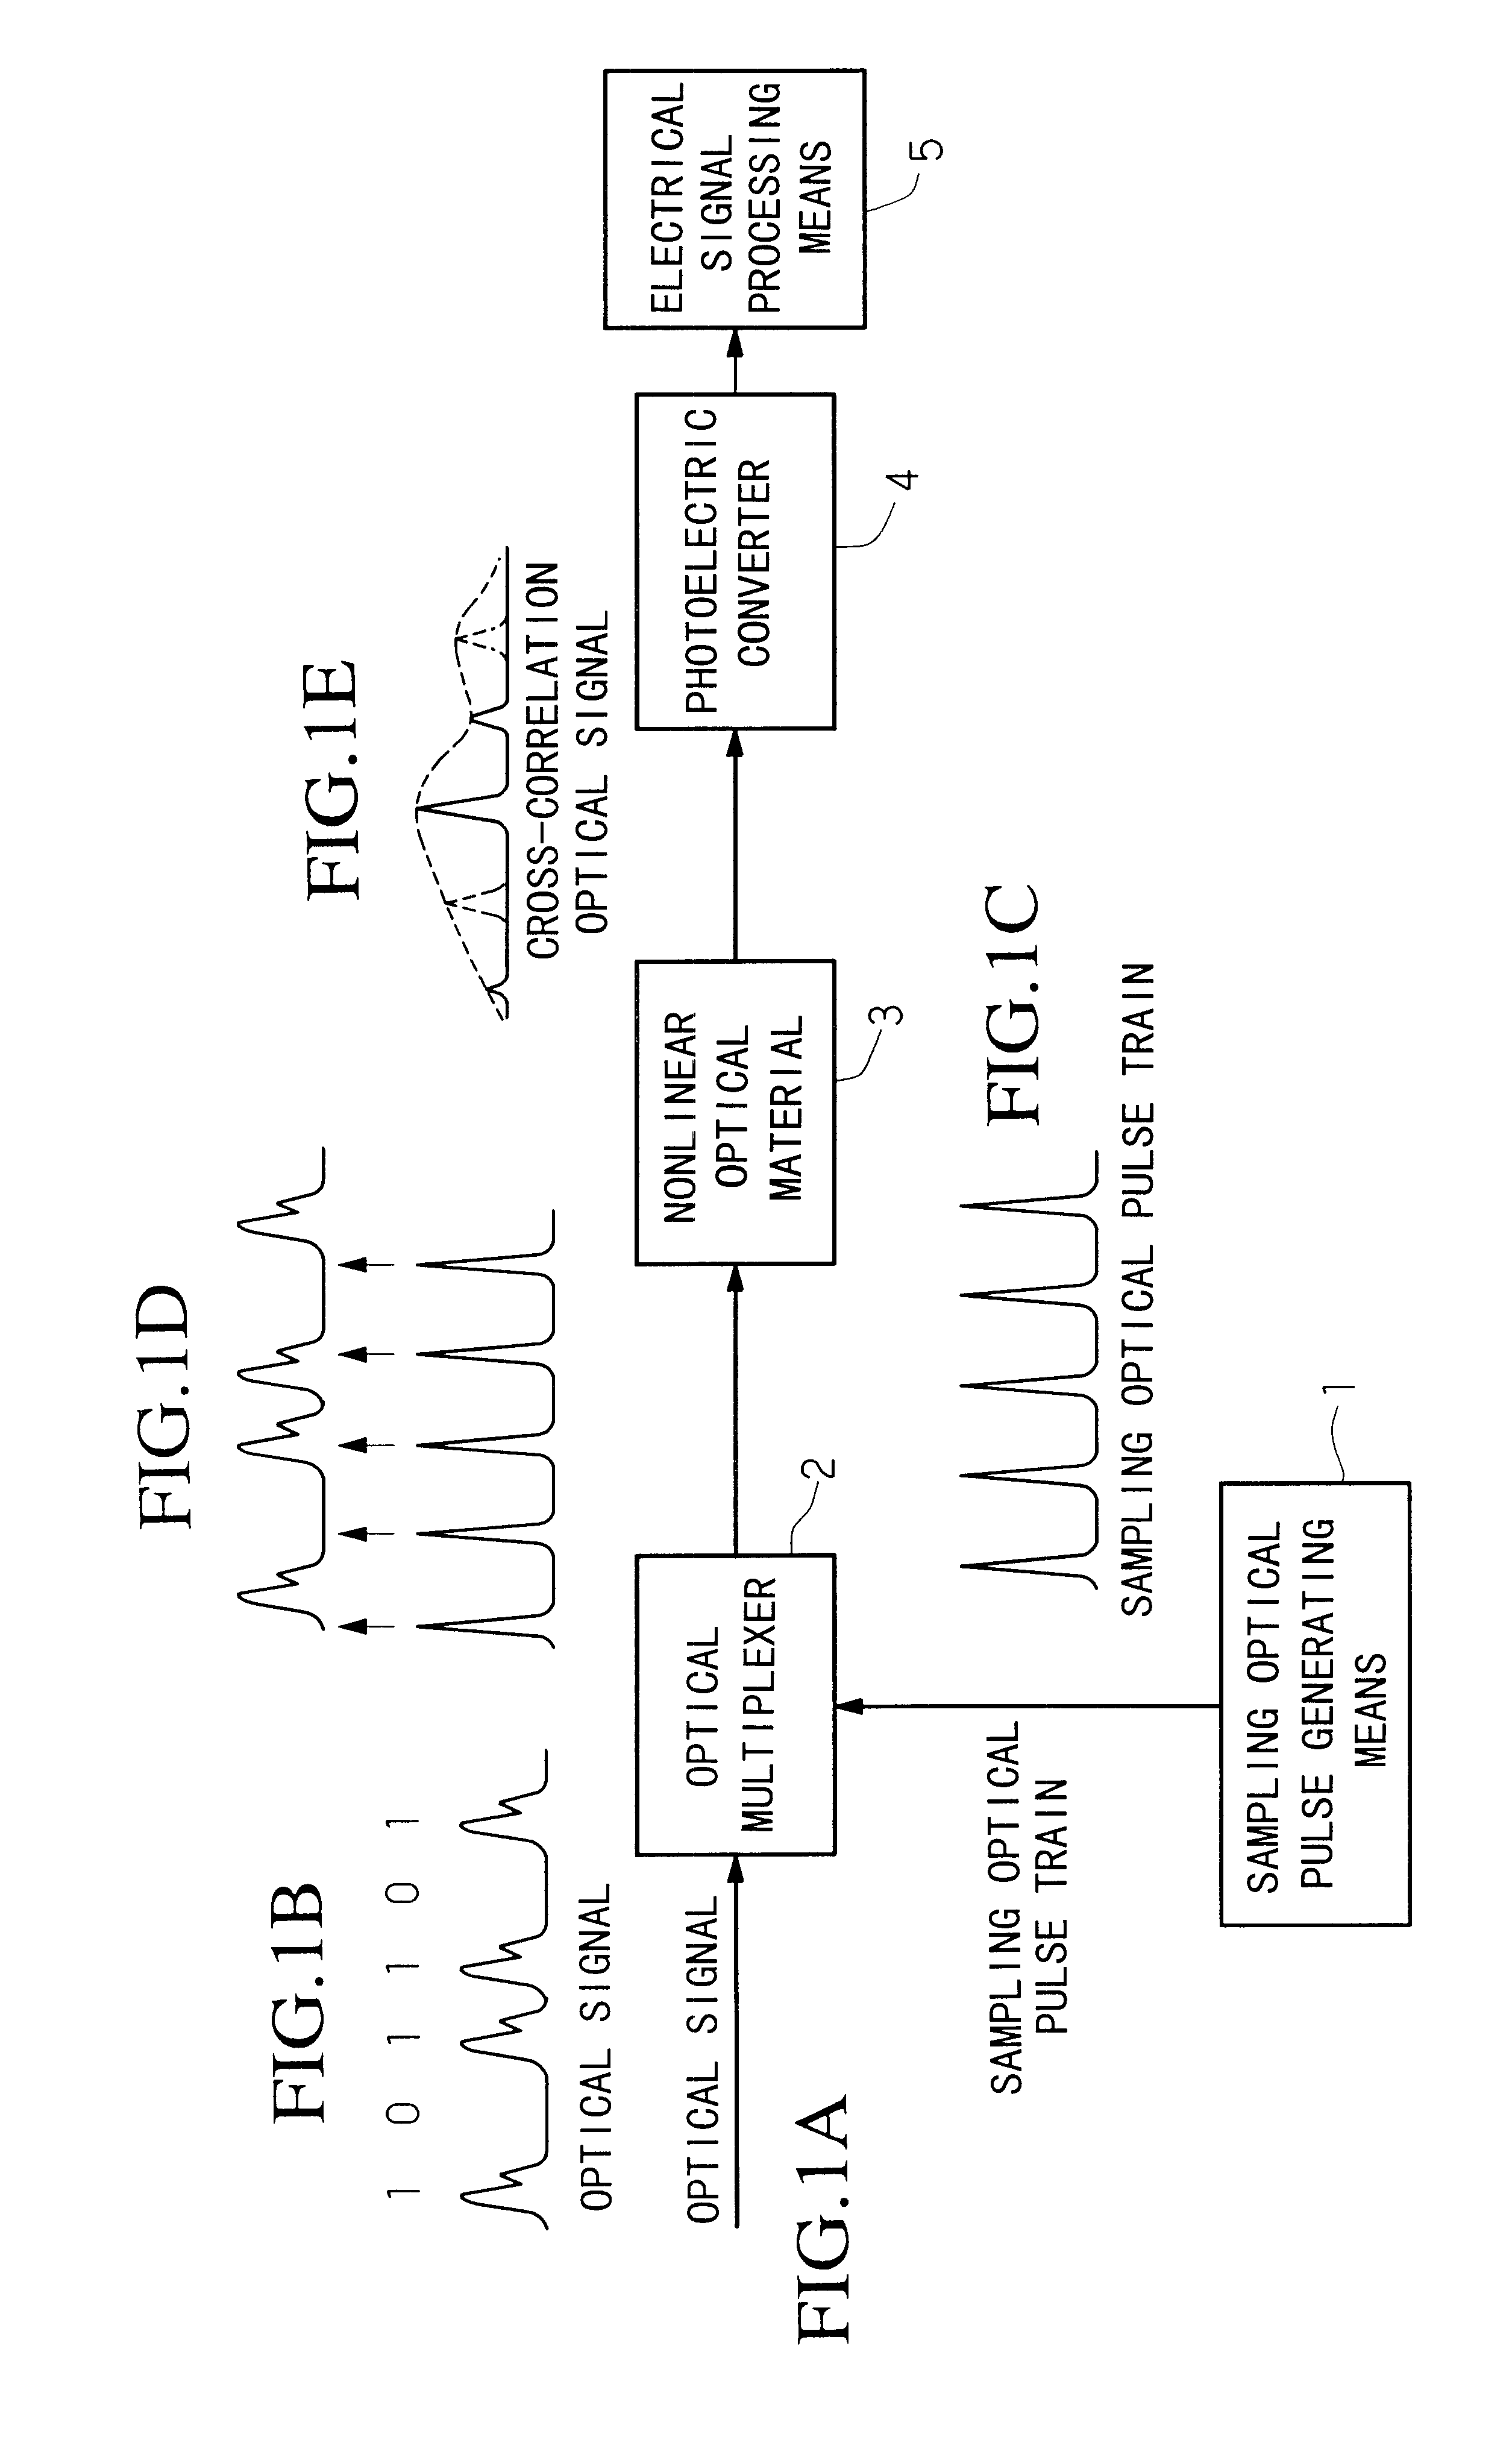 System for monitoring quality of optical signals having different bit rates